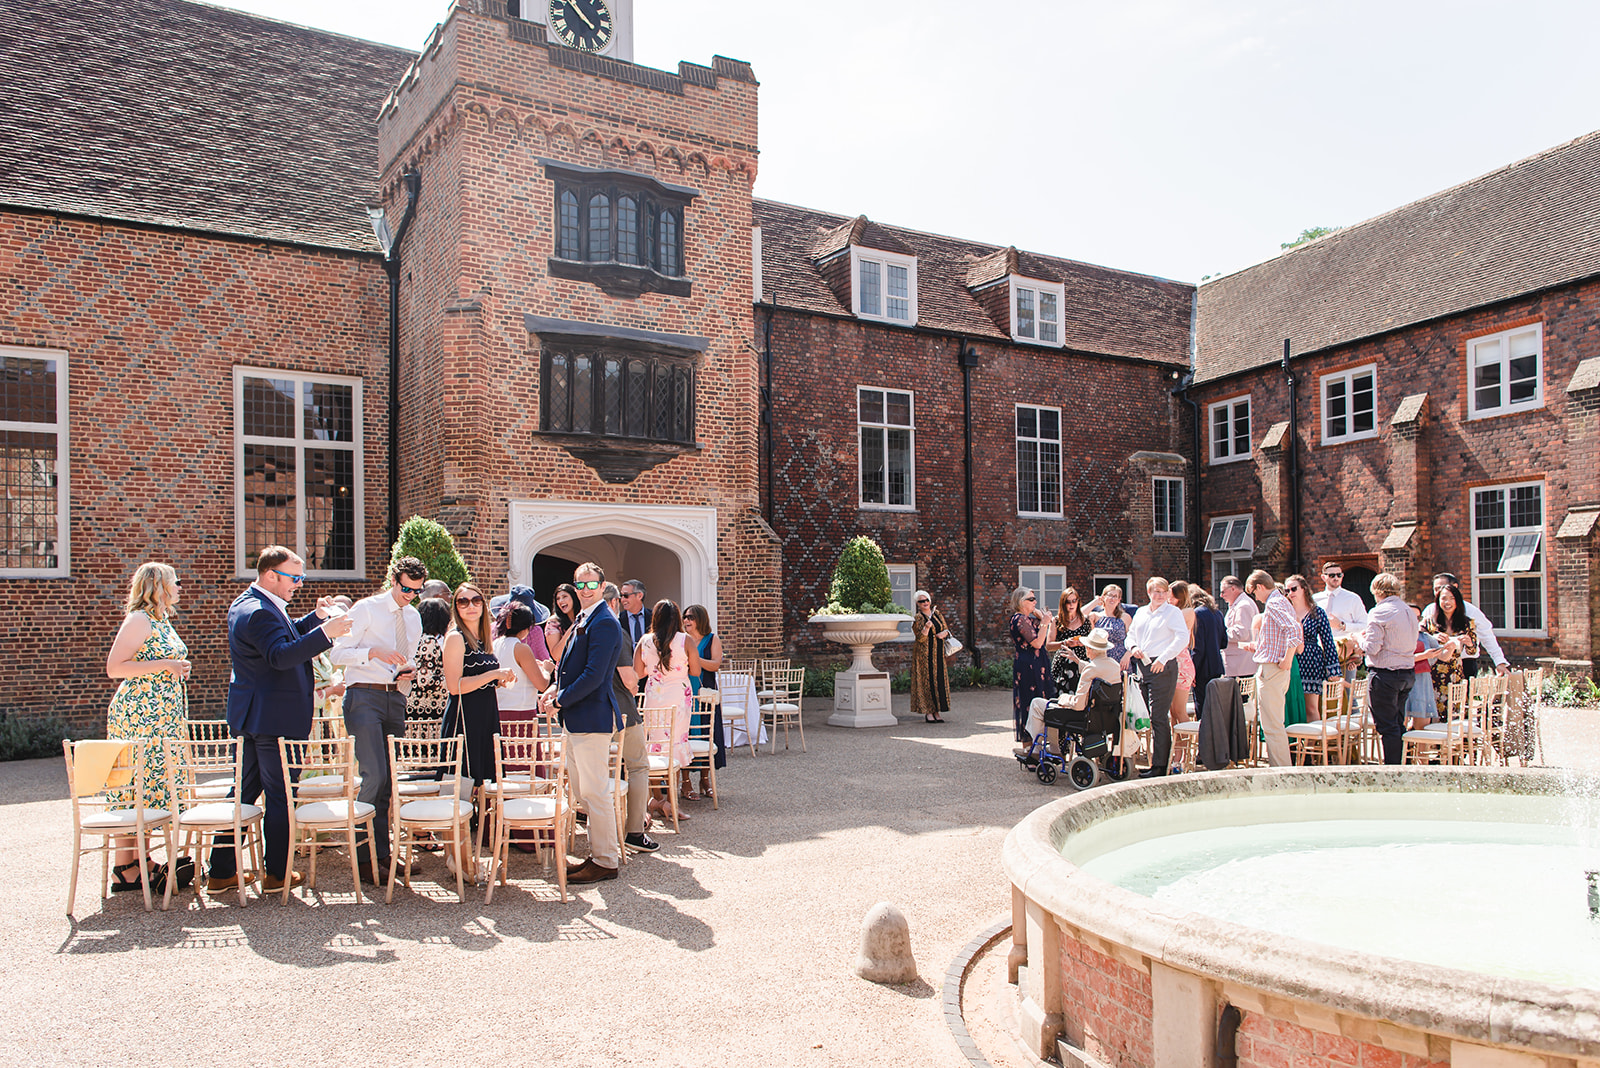 Nikita and Chris's wedding ceremony at the Fulham Palace